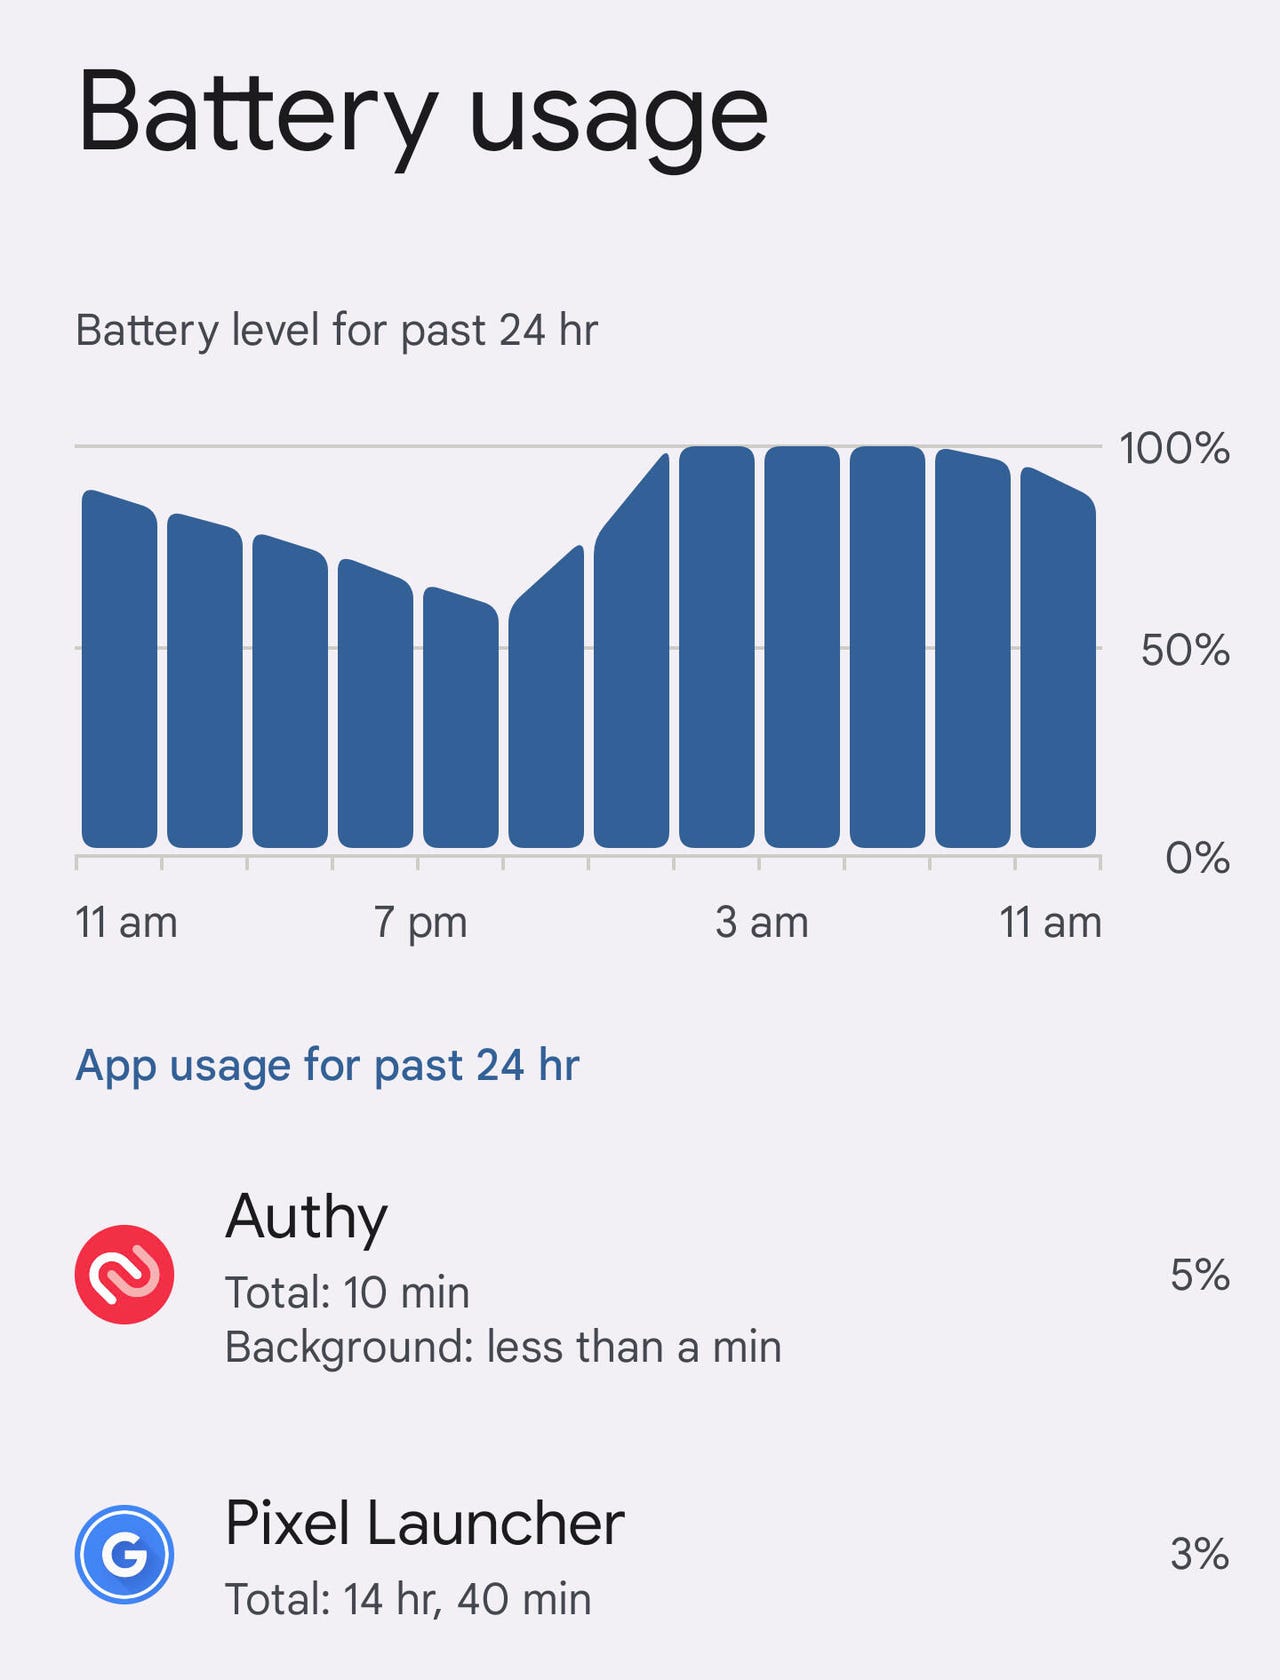 Android Battery Usage is displayed over a 24-hour period.